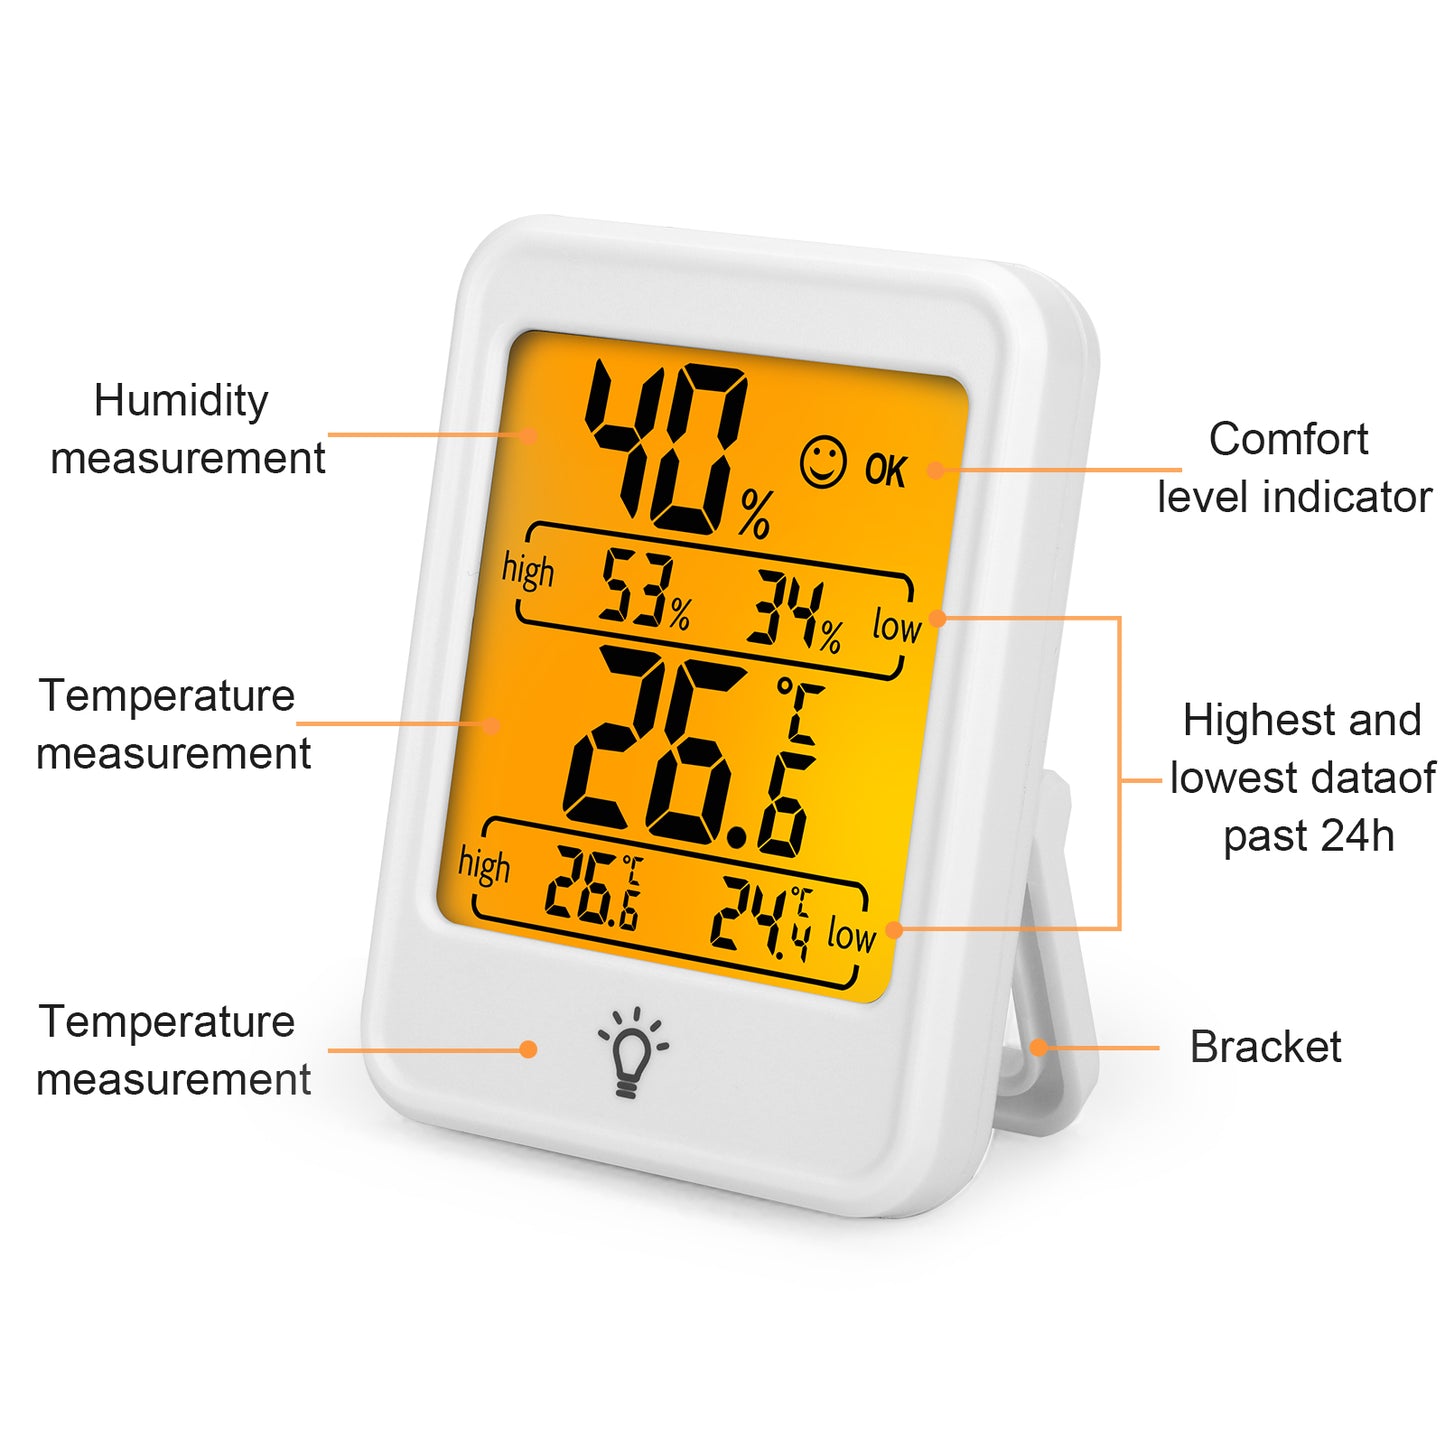 Digital LCD Indoor Thermometer - Hygrometer Humidity Meter Monitor Sensor Office with Backlight and magnet (White)